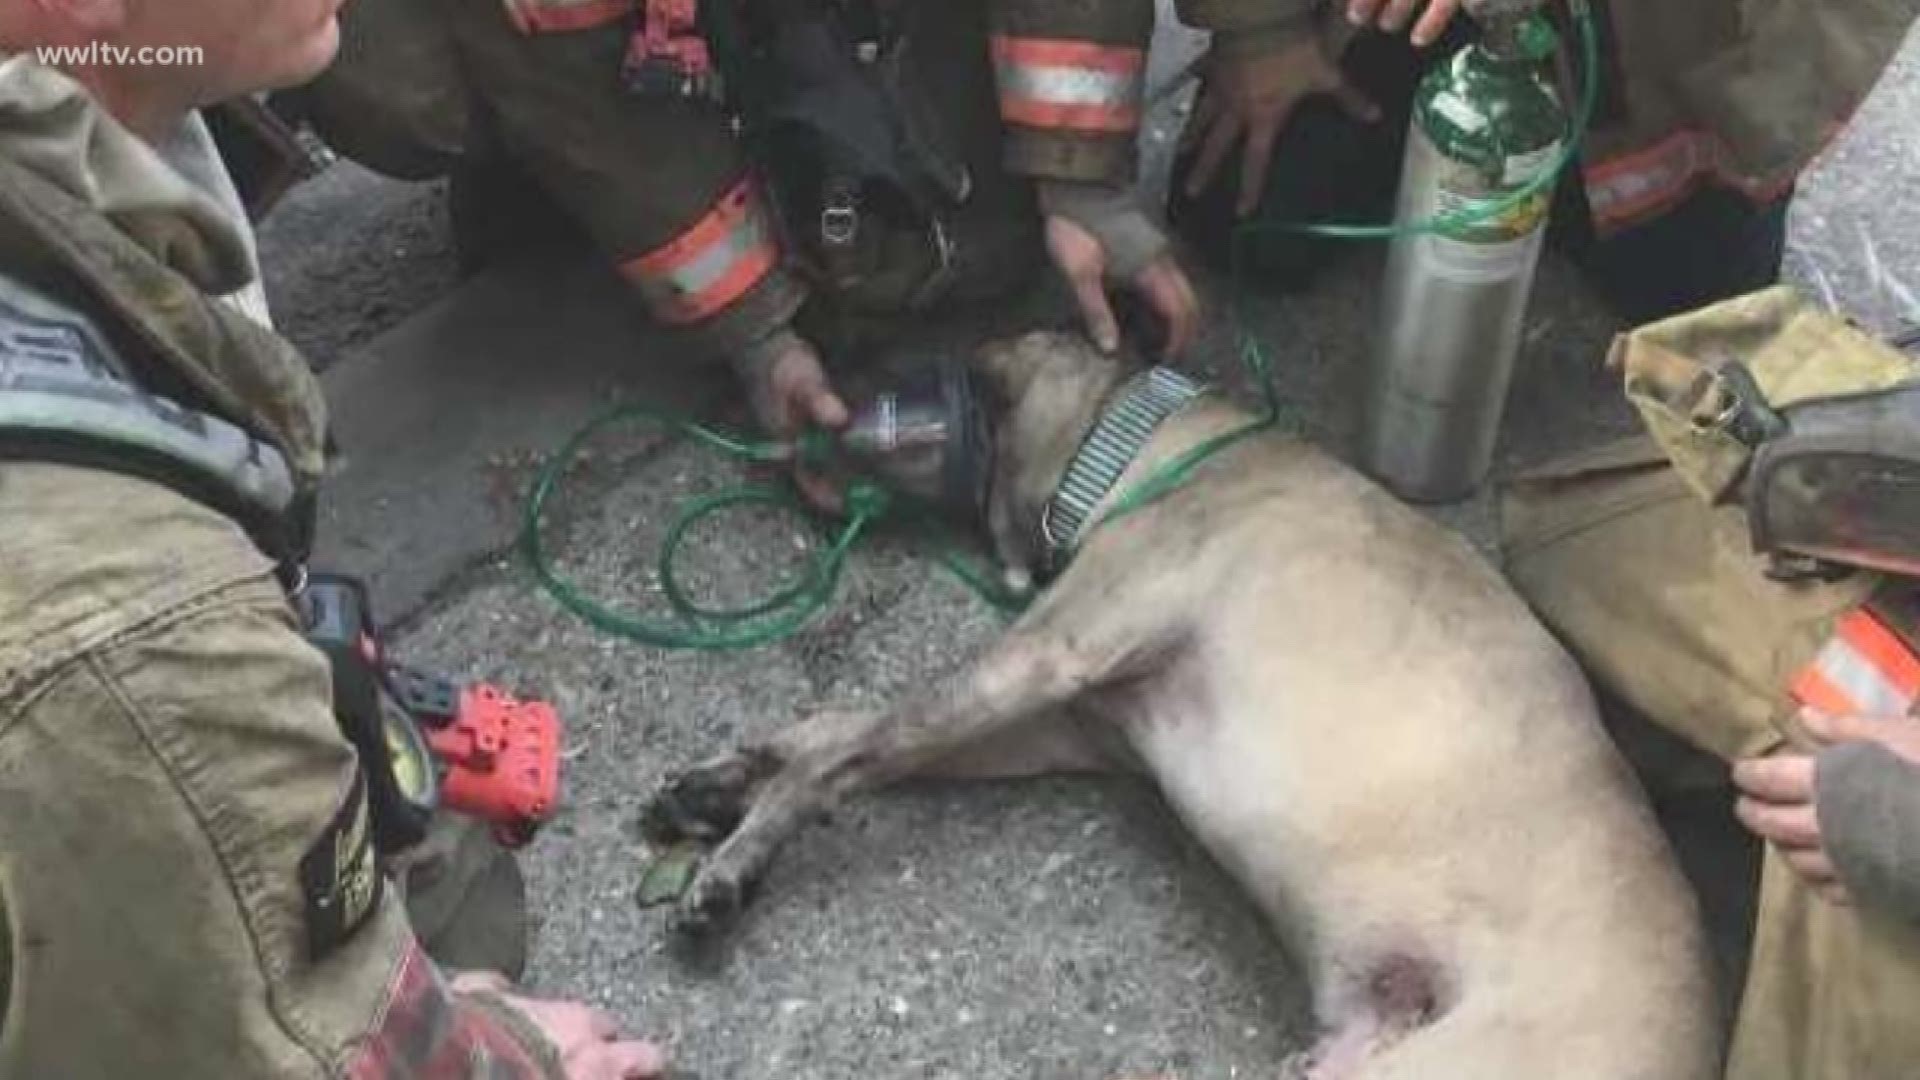 When a fire broke out at the Esplanade at City Park Thursday evening, the good news was no people were injured or lost their lives. But it was the picture on social media that stole people's hearts....first responders resuscitating a dog unconscious from smoke inhalation.